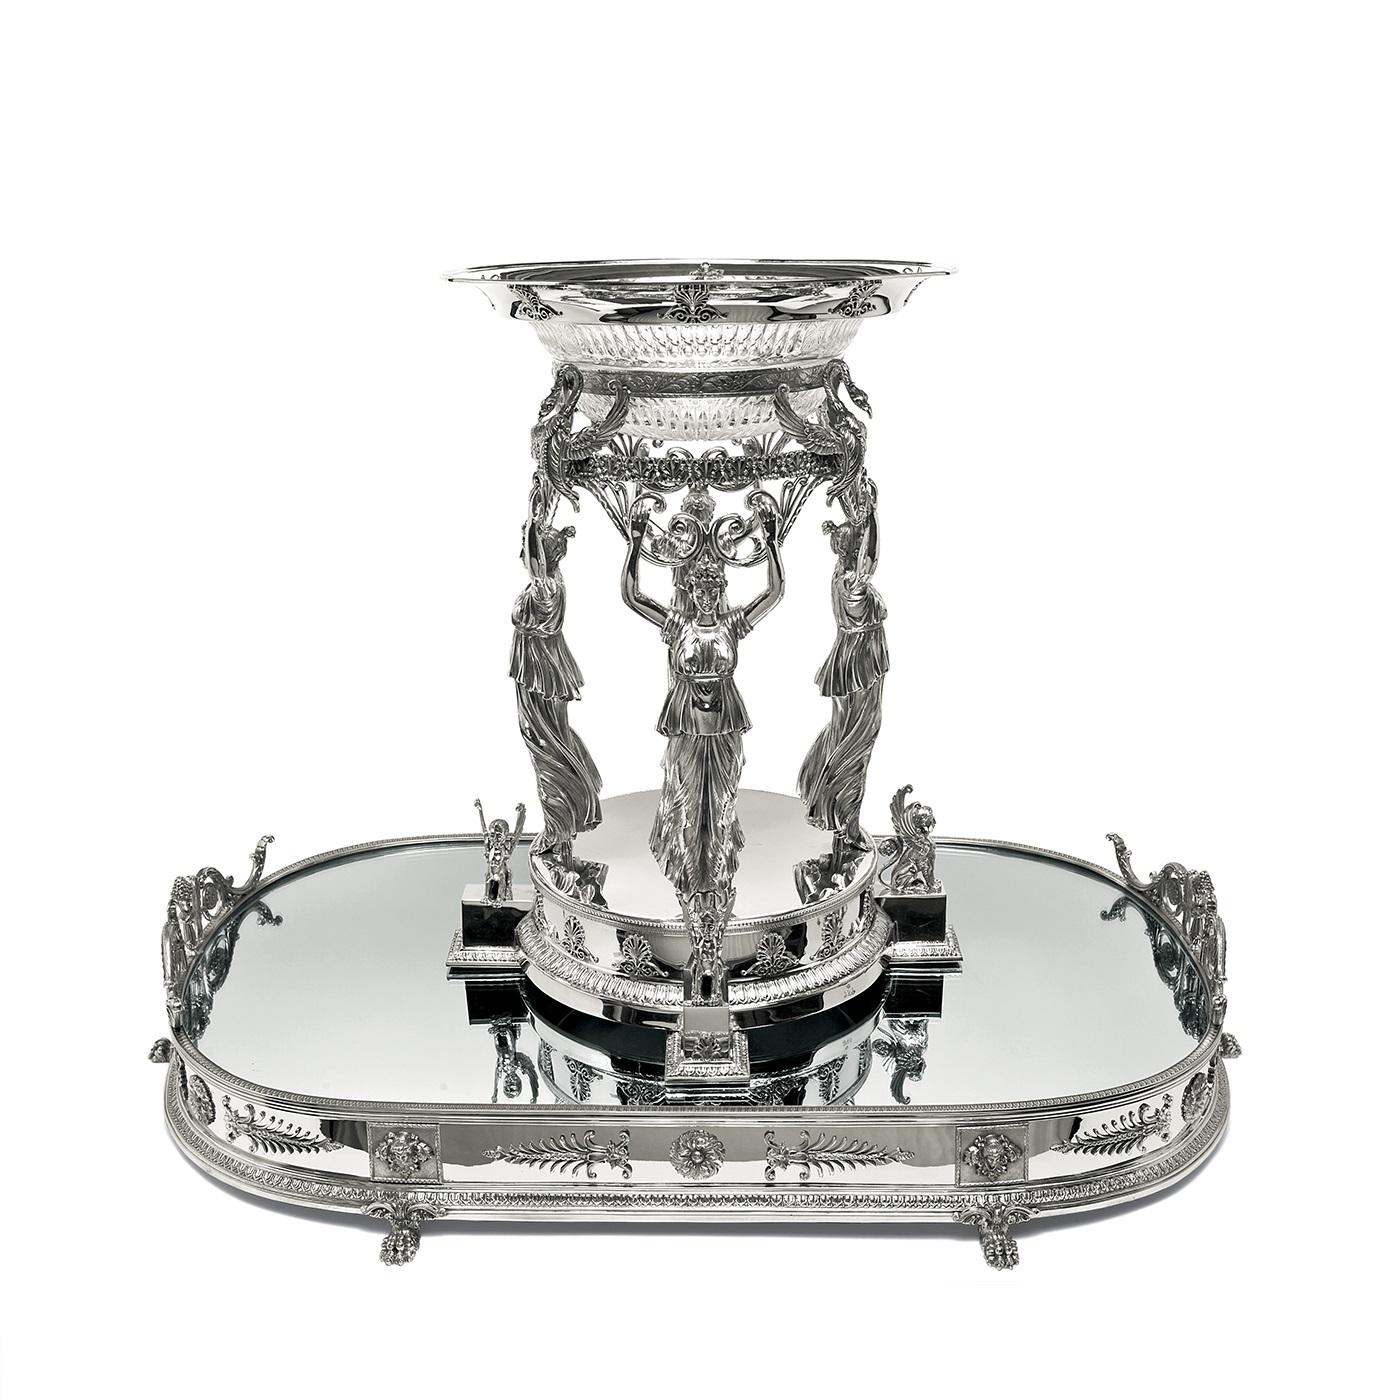 This superb centerpiece is entirely crafted in silver using artisanal methods and is inspired by the lavish, neoclassical Empire style developed with Napoleon at the beginning of the 19th century. It is made up of three elements: the oval base with